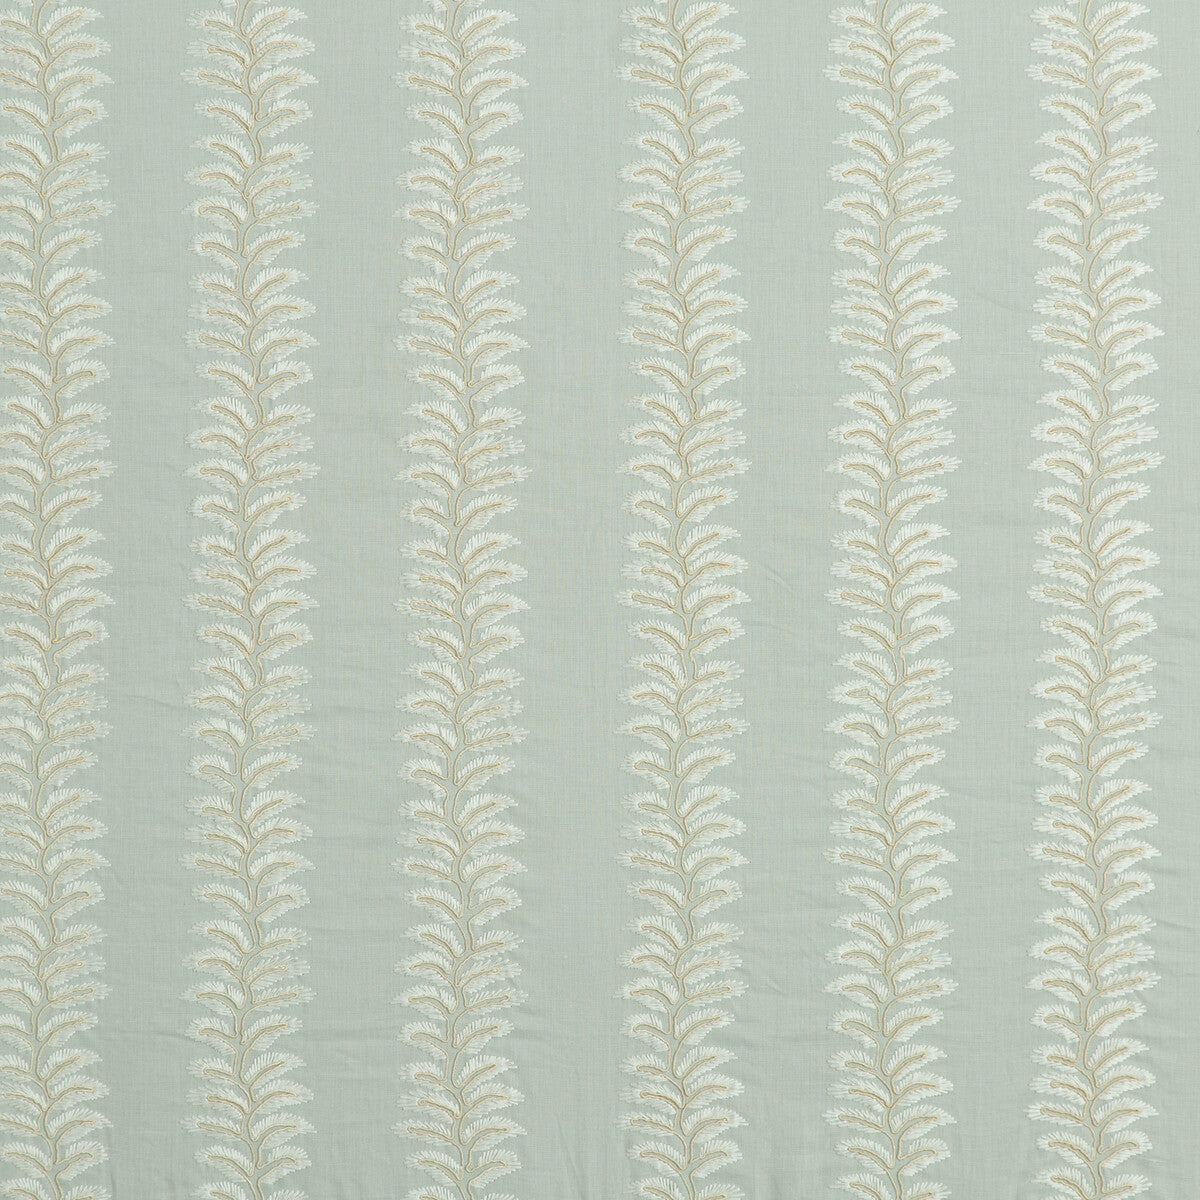 New Bradbourne fabric in pale aqua color - pattern BF10963.715.0 - by G P &amp; J Baker in the Langdale collection